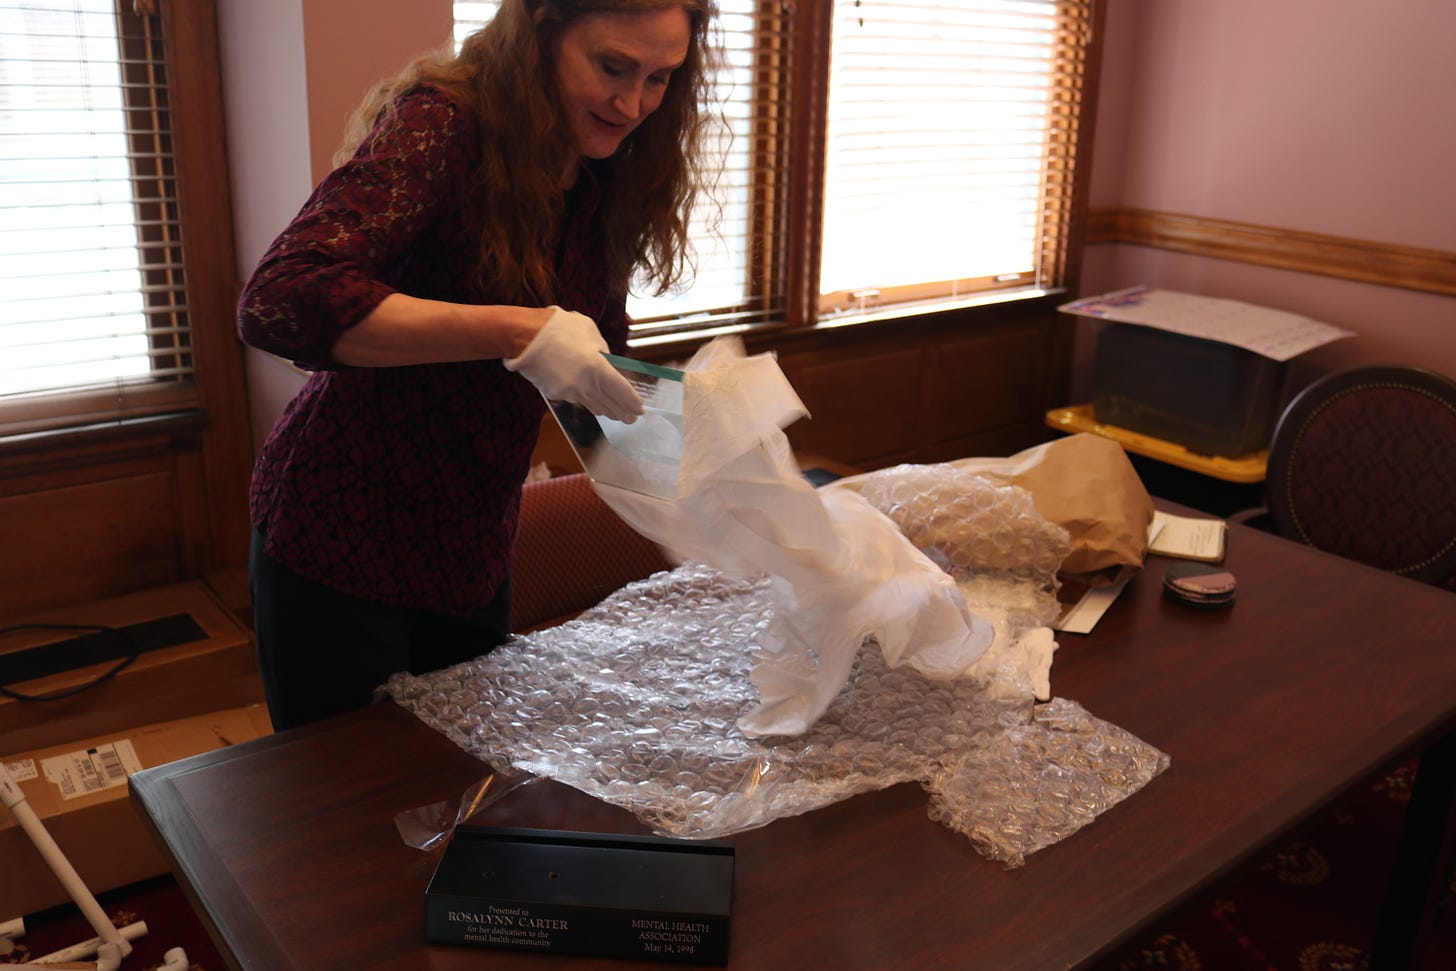 Michelle Gullion unwraps a new acquisition at the National First Ladies Library.